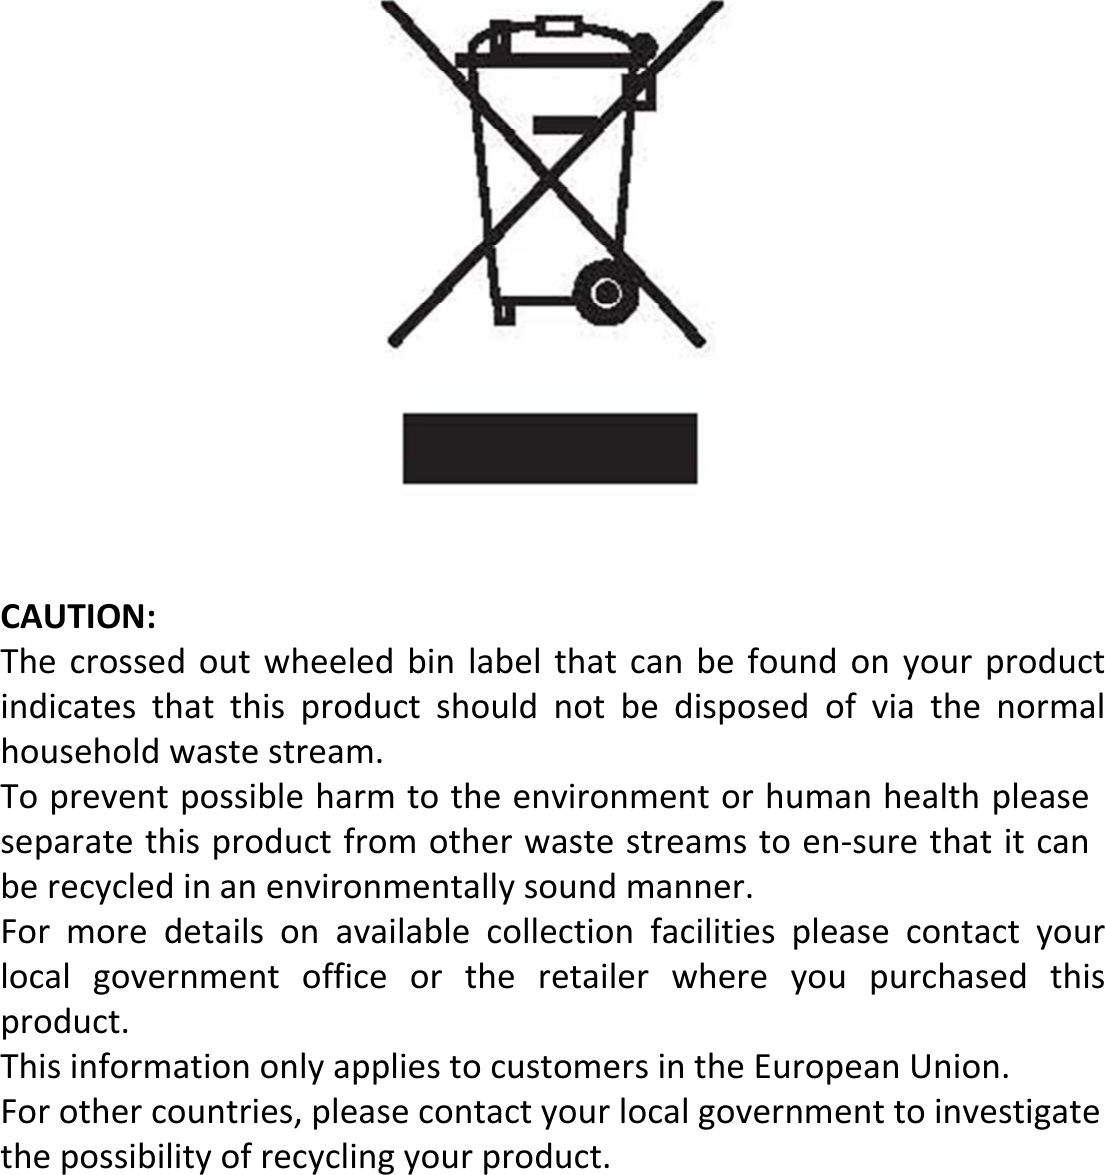 CAUTION: The  crossed  out  wheeled  bin  label  that  can  be  found  on  your  product indicates  that  this  product  should  not  be  disposed  of  via  the  normal household waste stream.To prevent possible harm to the environment or human health please separate this product from other waste streams to en-sure that it can be recycled in an environmentally sound manner. For  more  details  on  available  collection  facilities  please  contact  your local  government  office  or  the  retailer  where  you  purchased  this product.This information only applies to customers in the European Union.For other countries, please contact your local government to investigate the possibility of recycling your product.